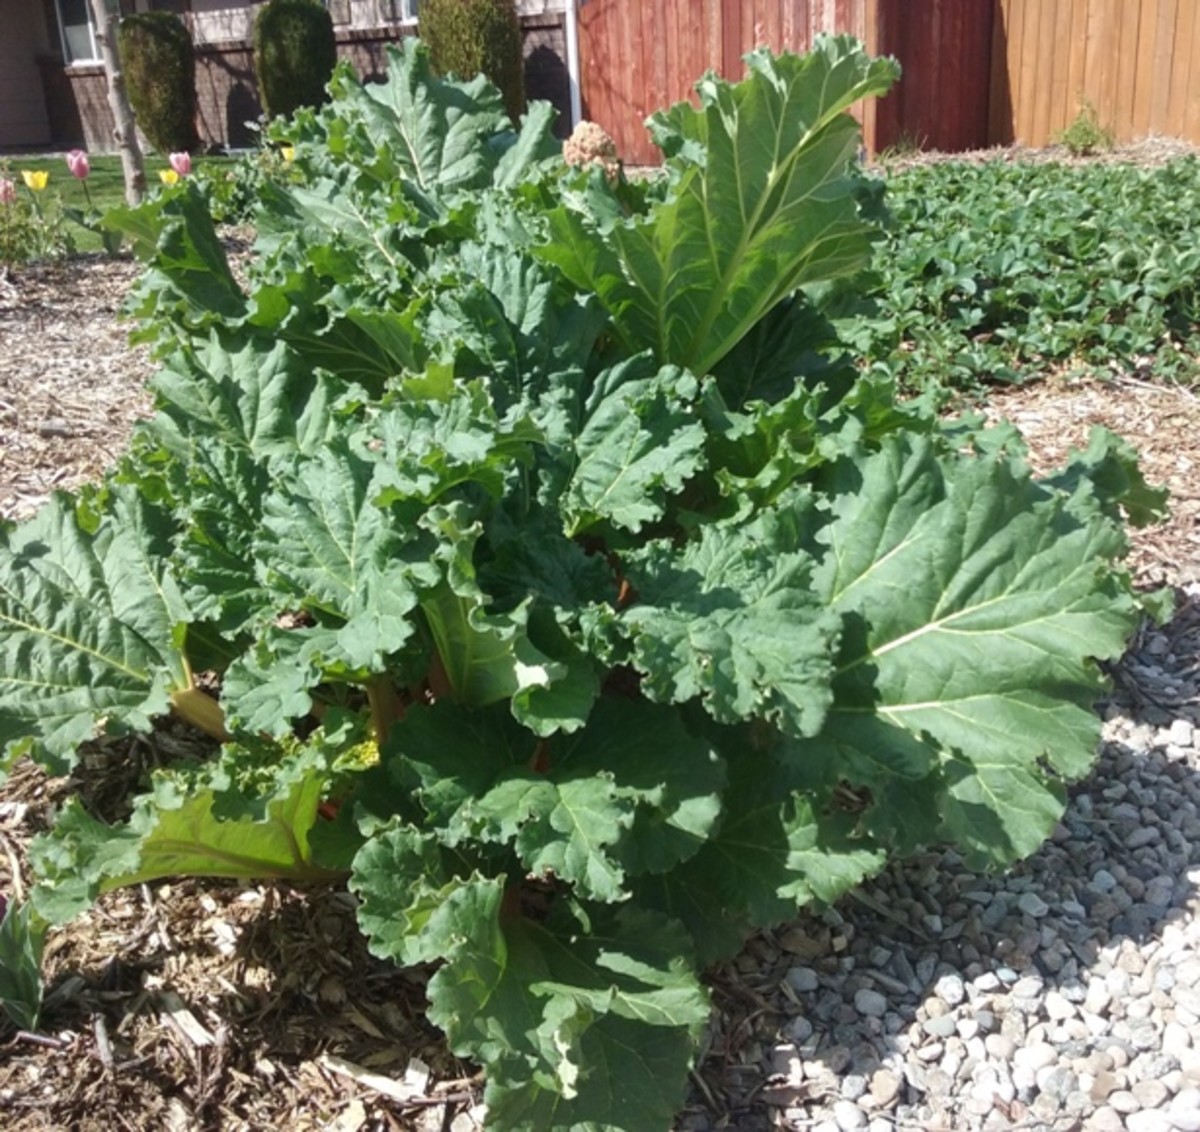 Rhubarb requires a good amount of water